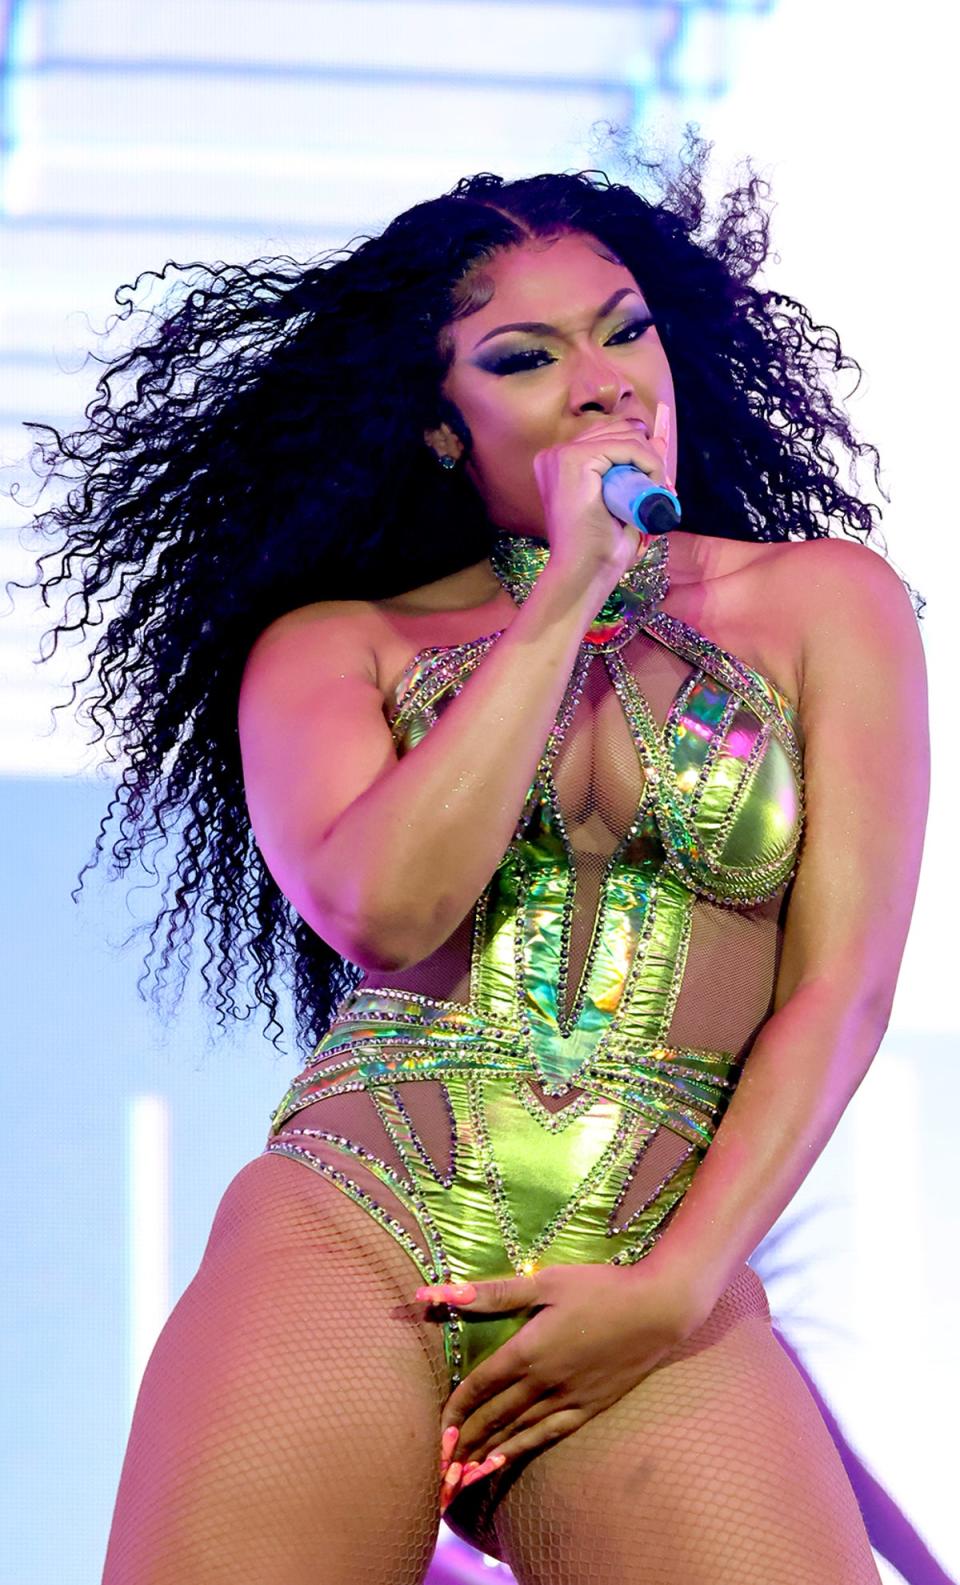 Hot girl summer pioneer Megan Thee Stallion (Getty Images)